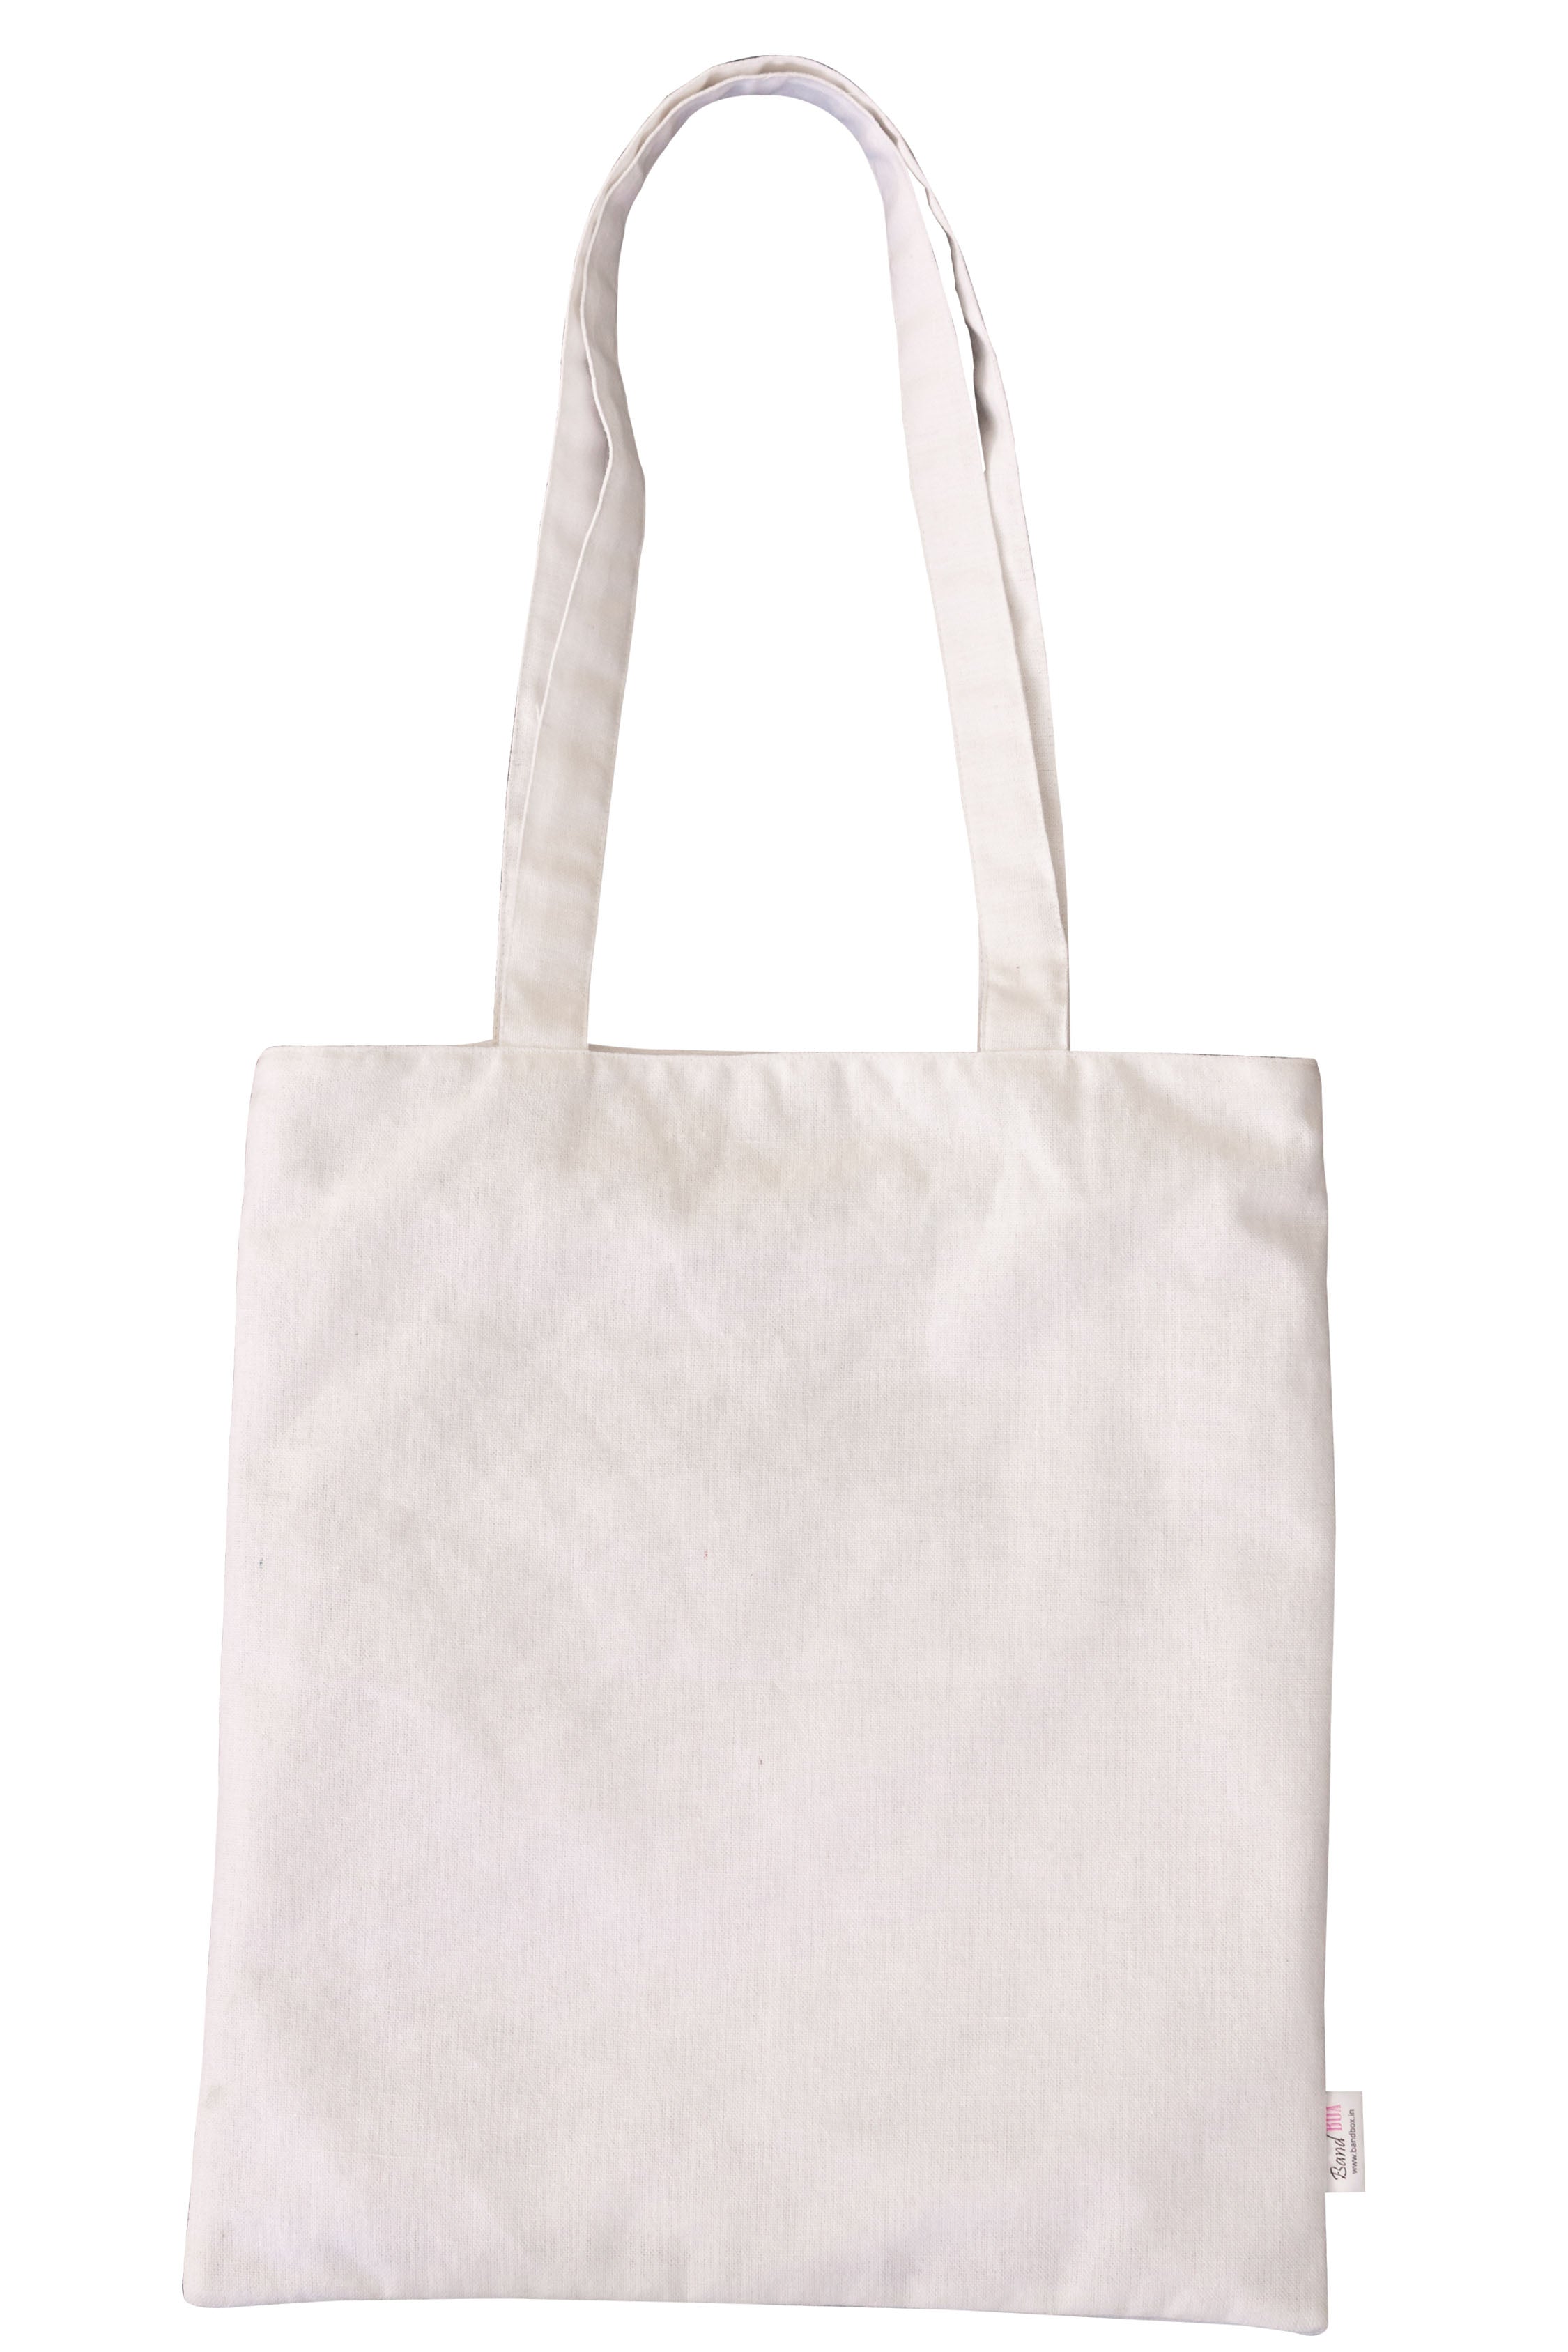 All Heart Cotton Tote Bag